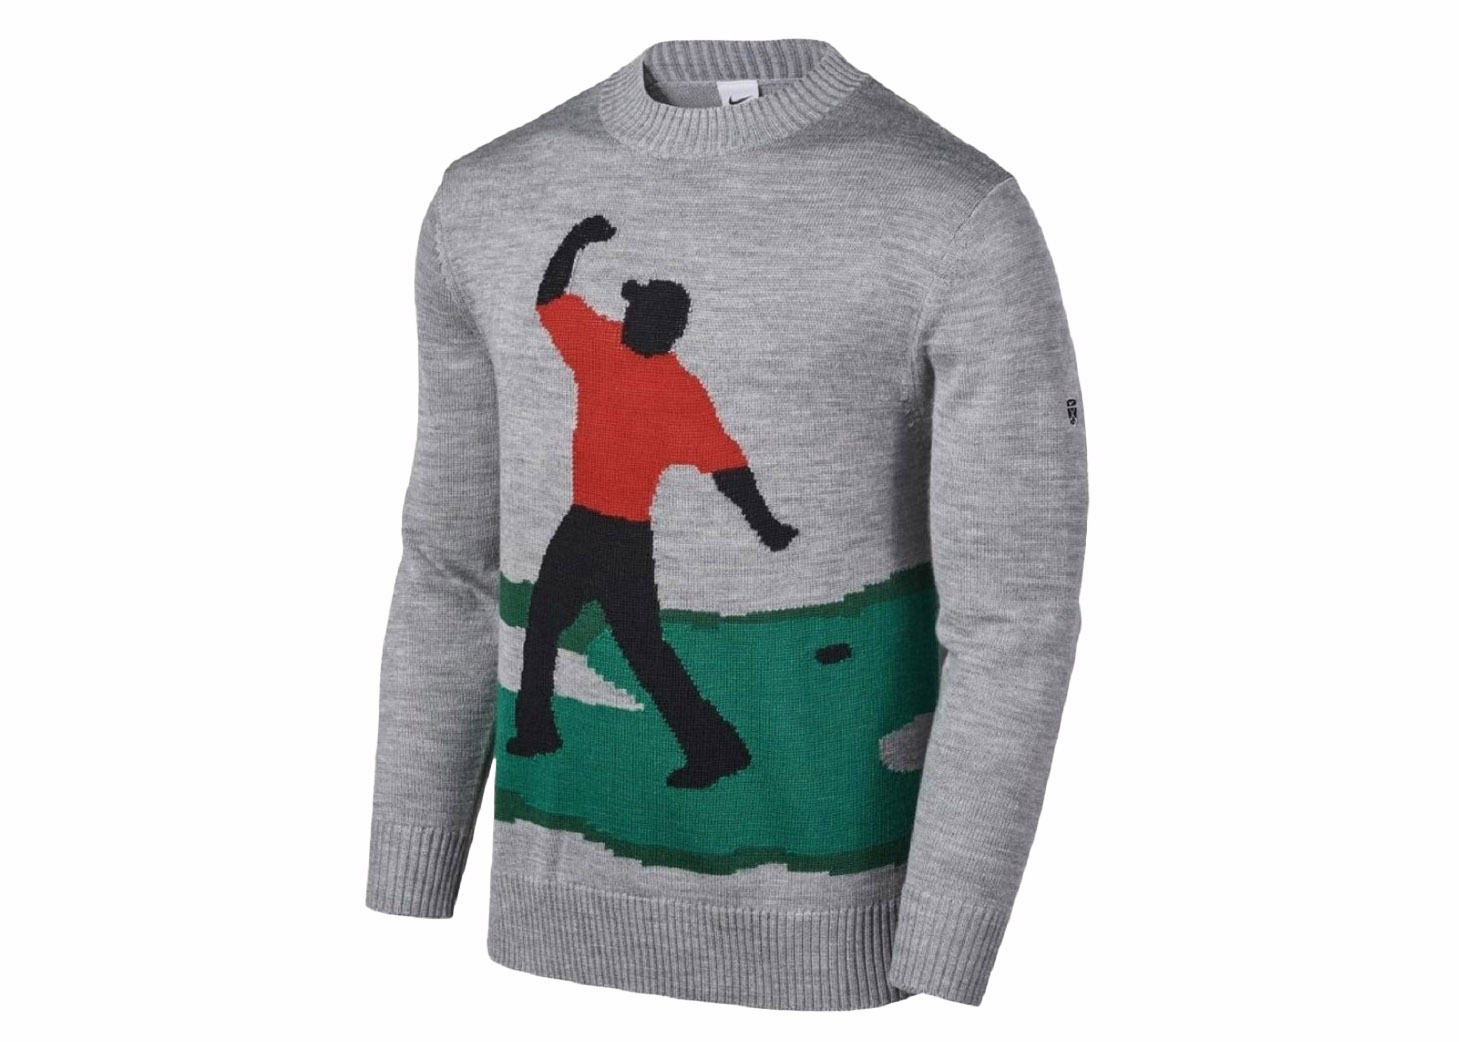 Nike Tiger Woods Knit Golf Crew Sweater Grey/Multicolor